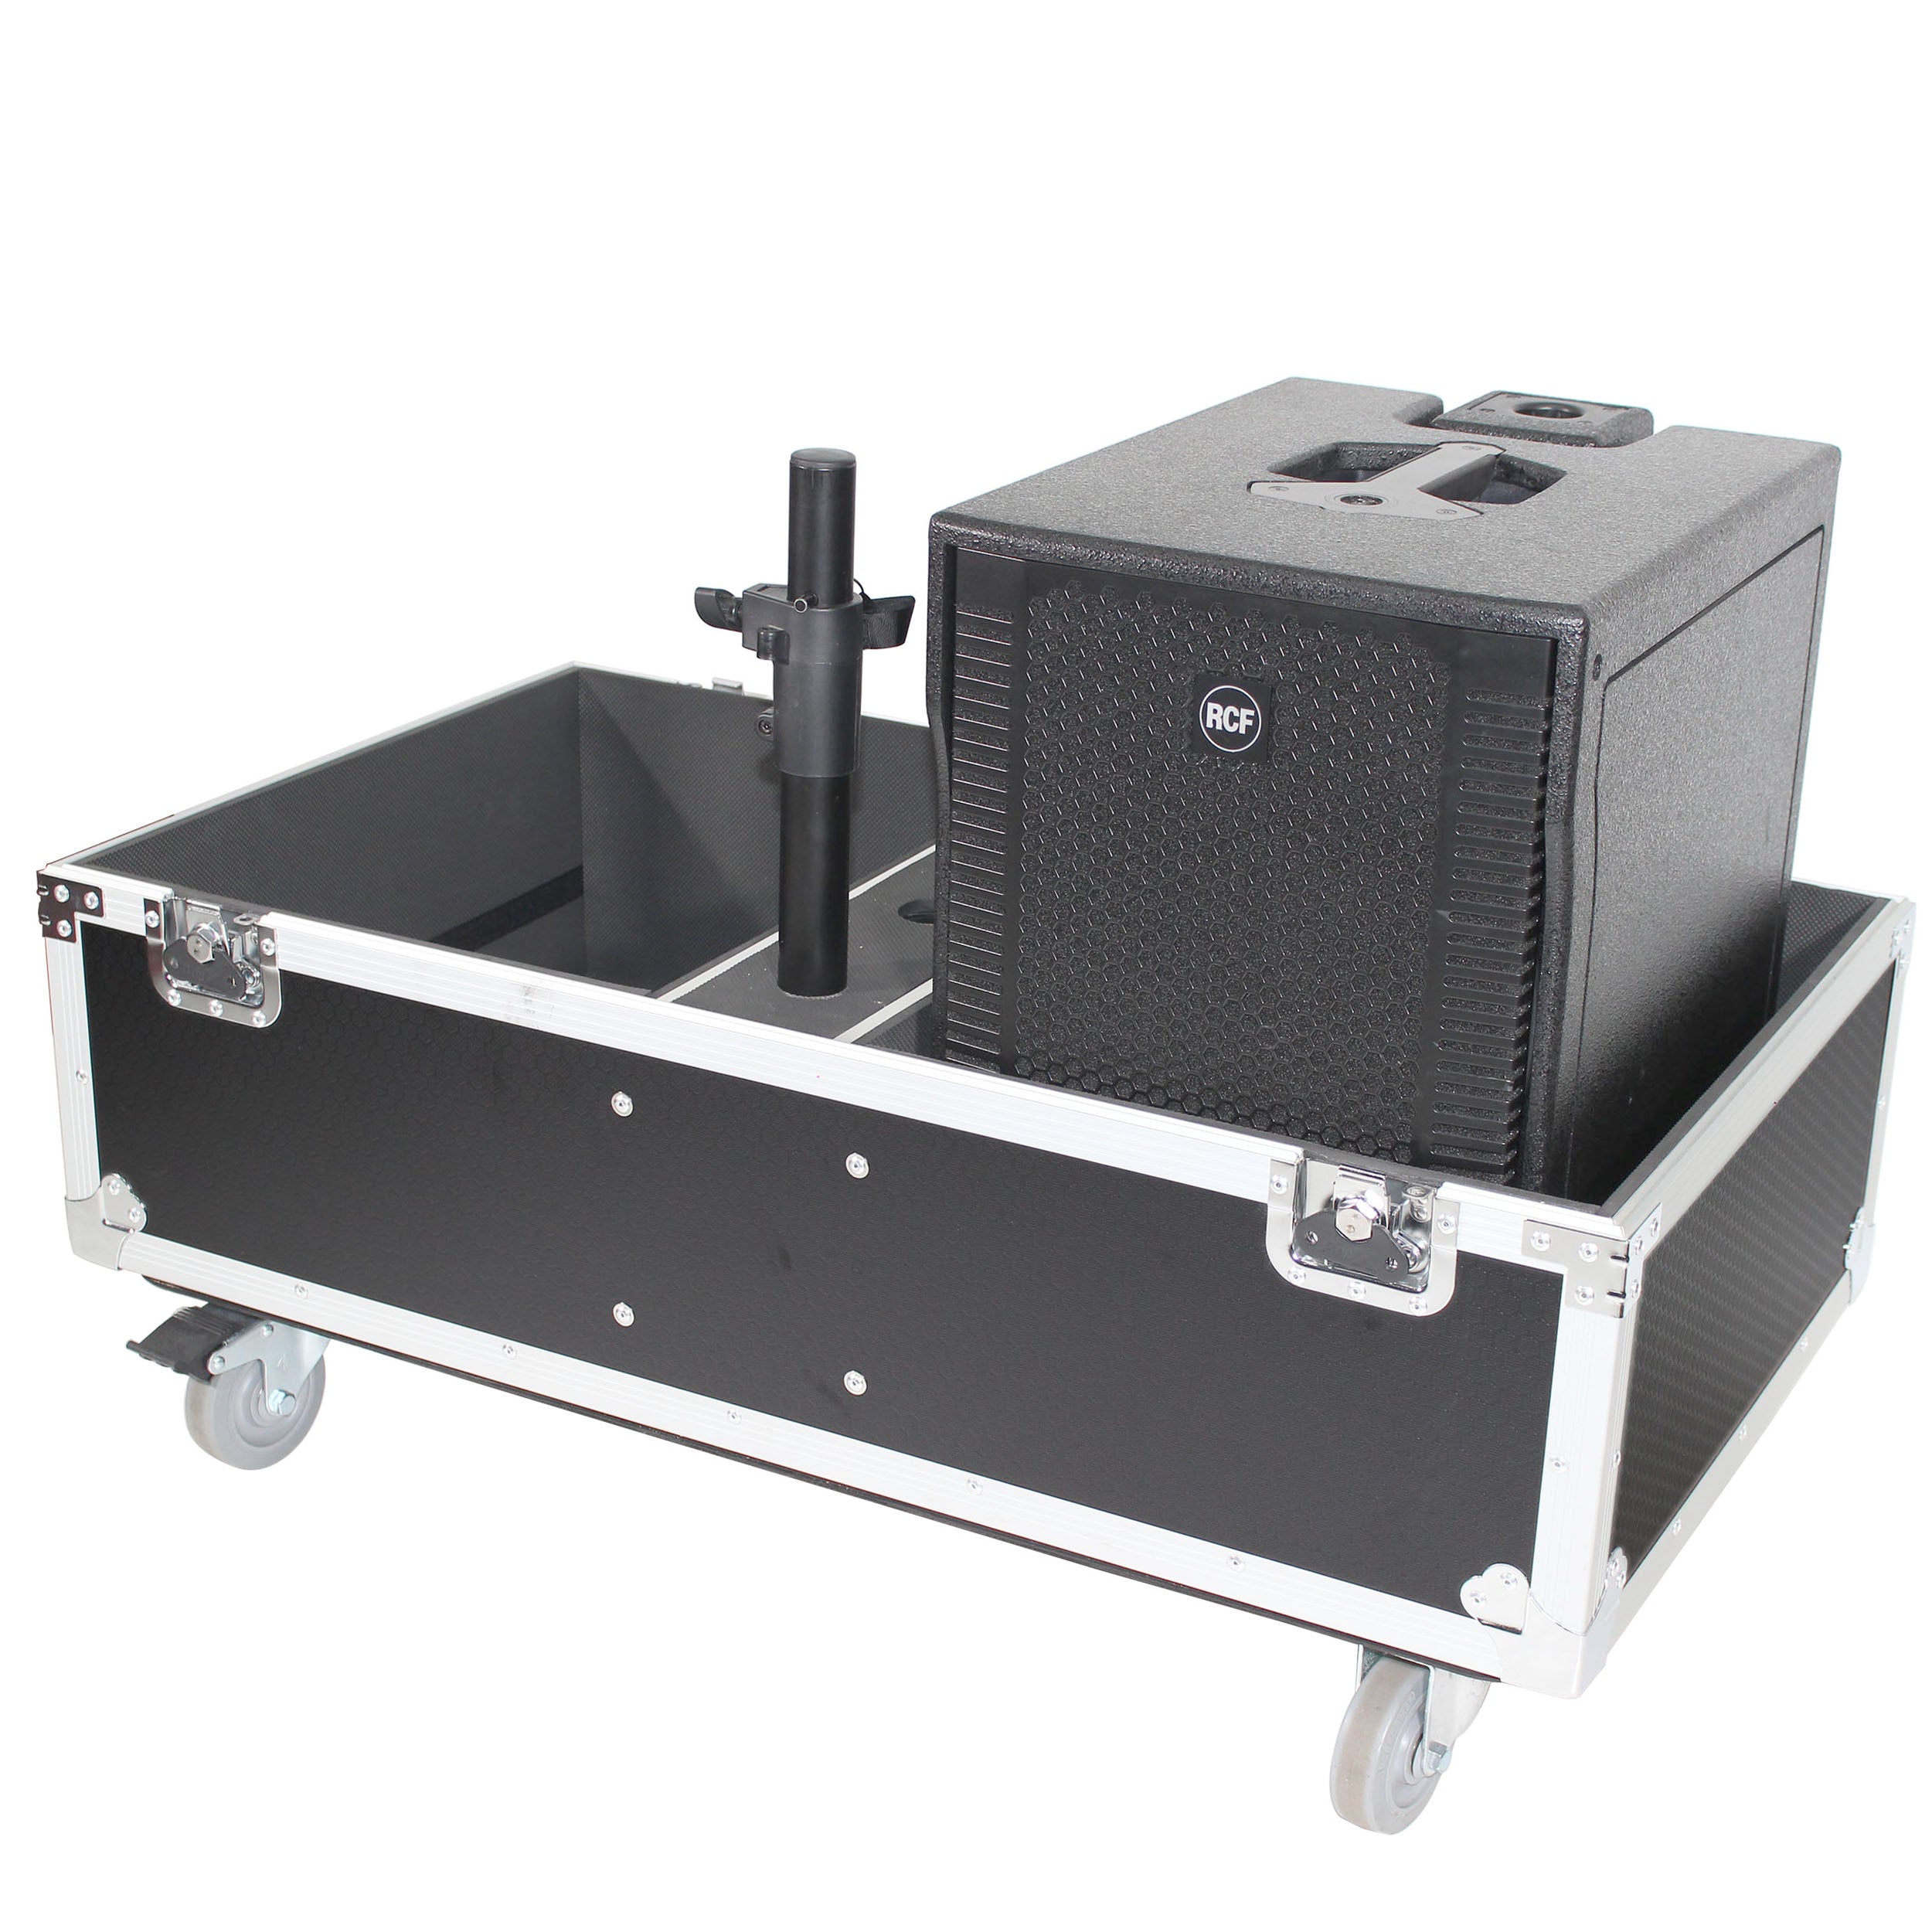 Pro X ATA Style Flight-Road Case For RCF EVOX 8 J8 JMIX8 Speaker Array System Fits Two Speakers and Subs X-RCF-EVOX8J8X2W